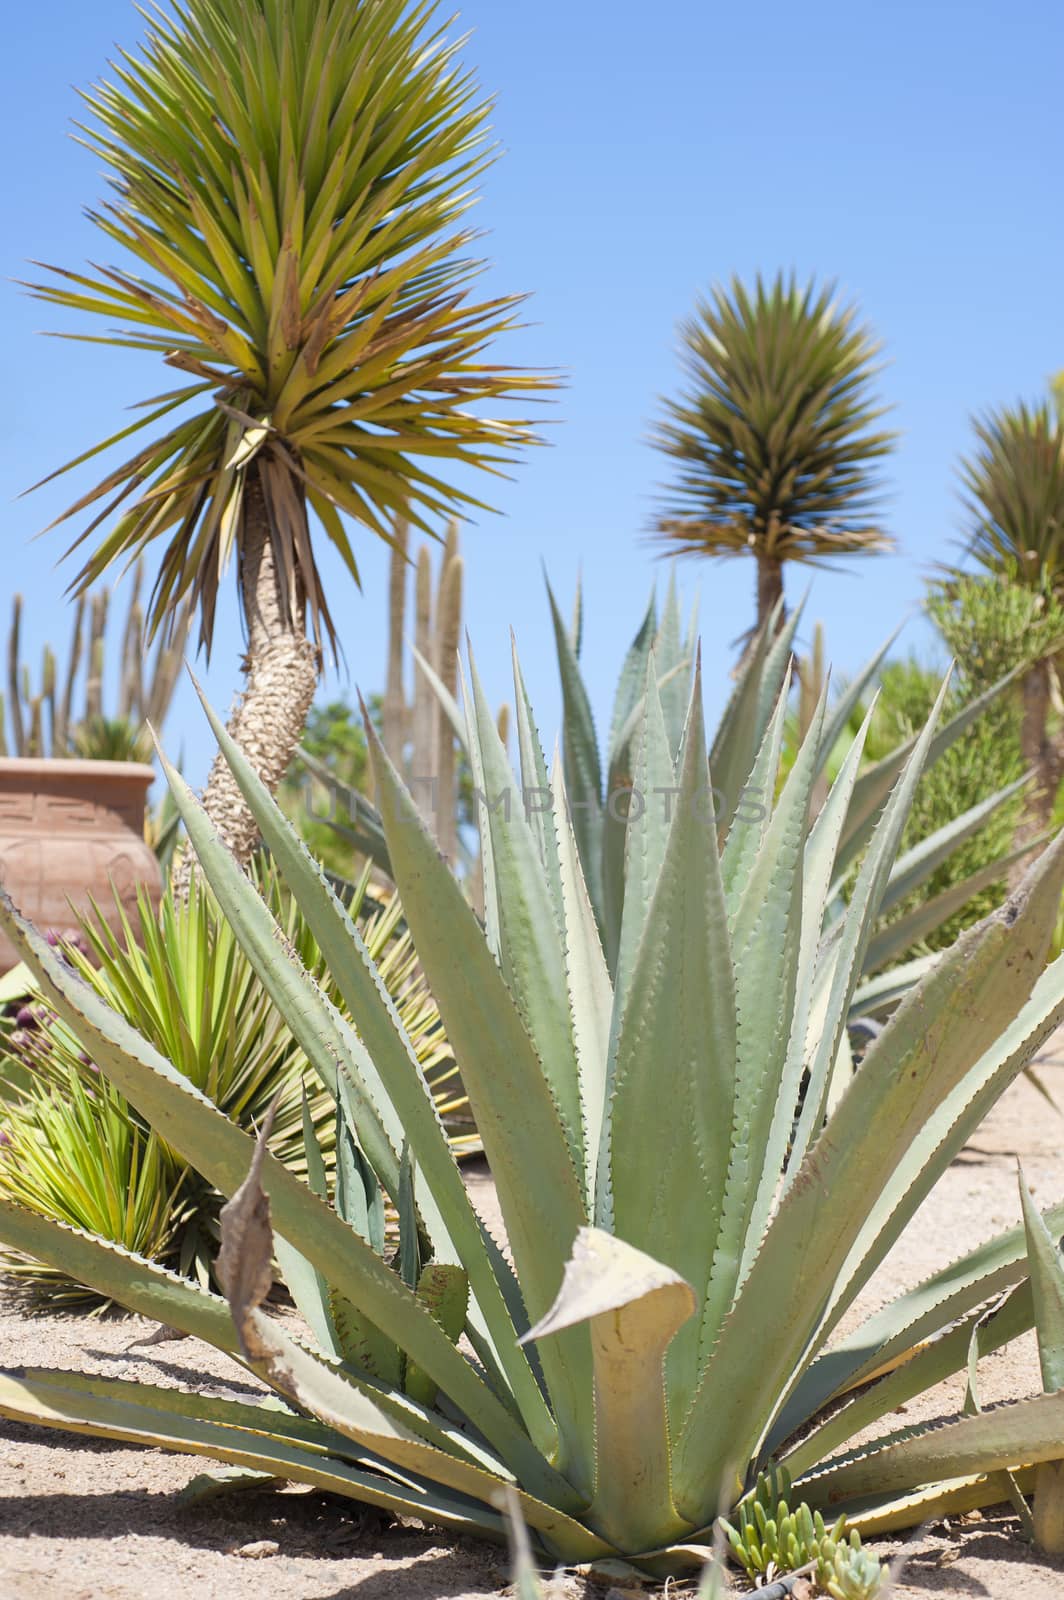 A desert garden with a variety of arid plants growing